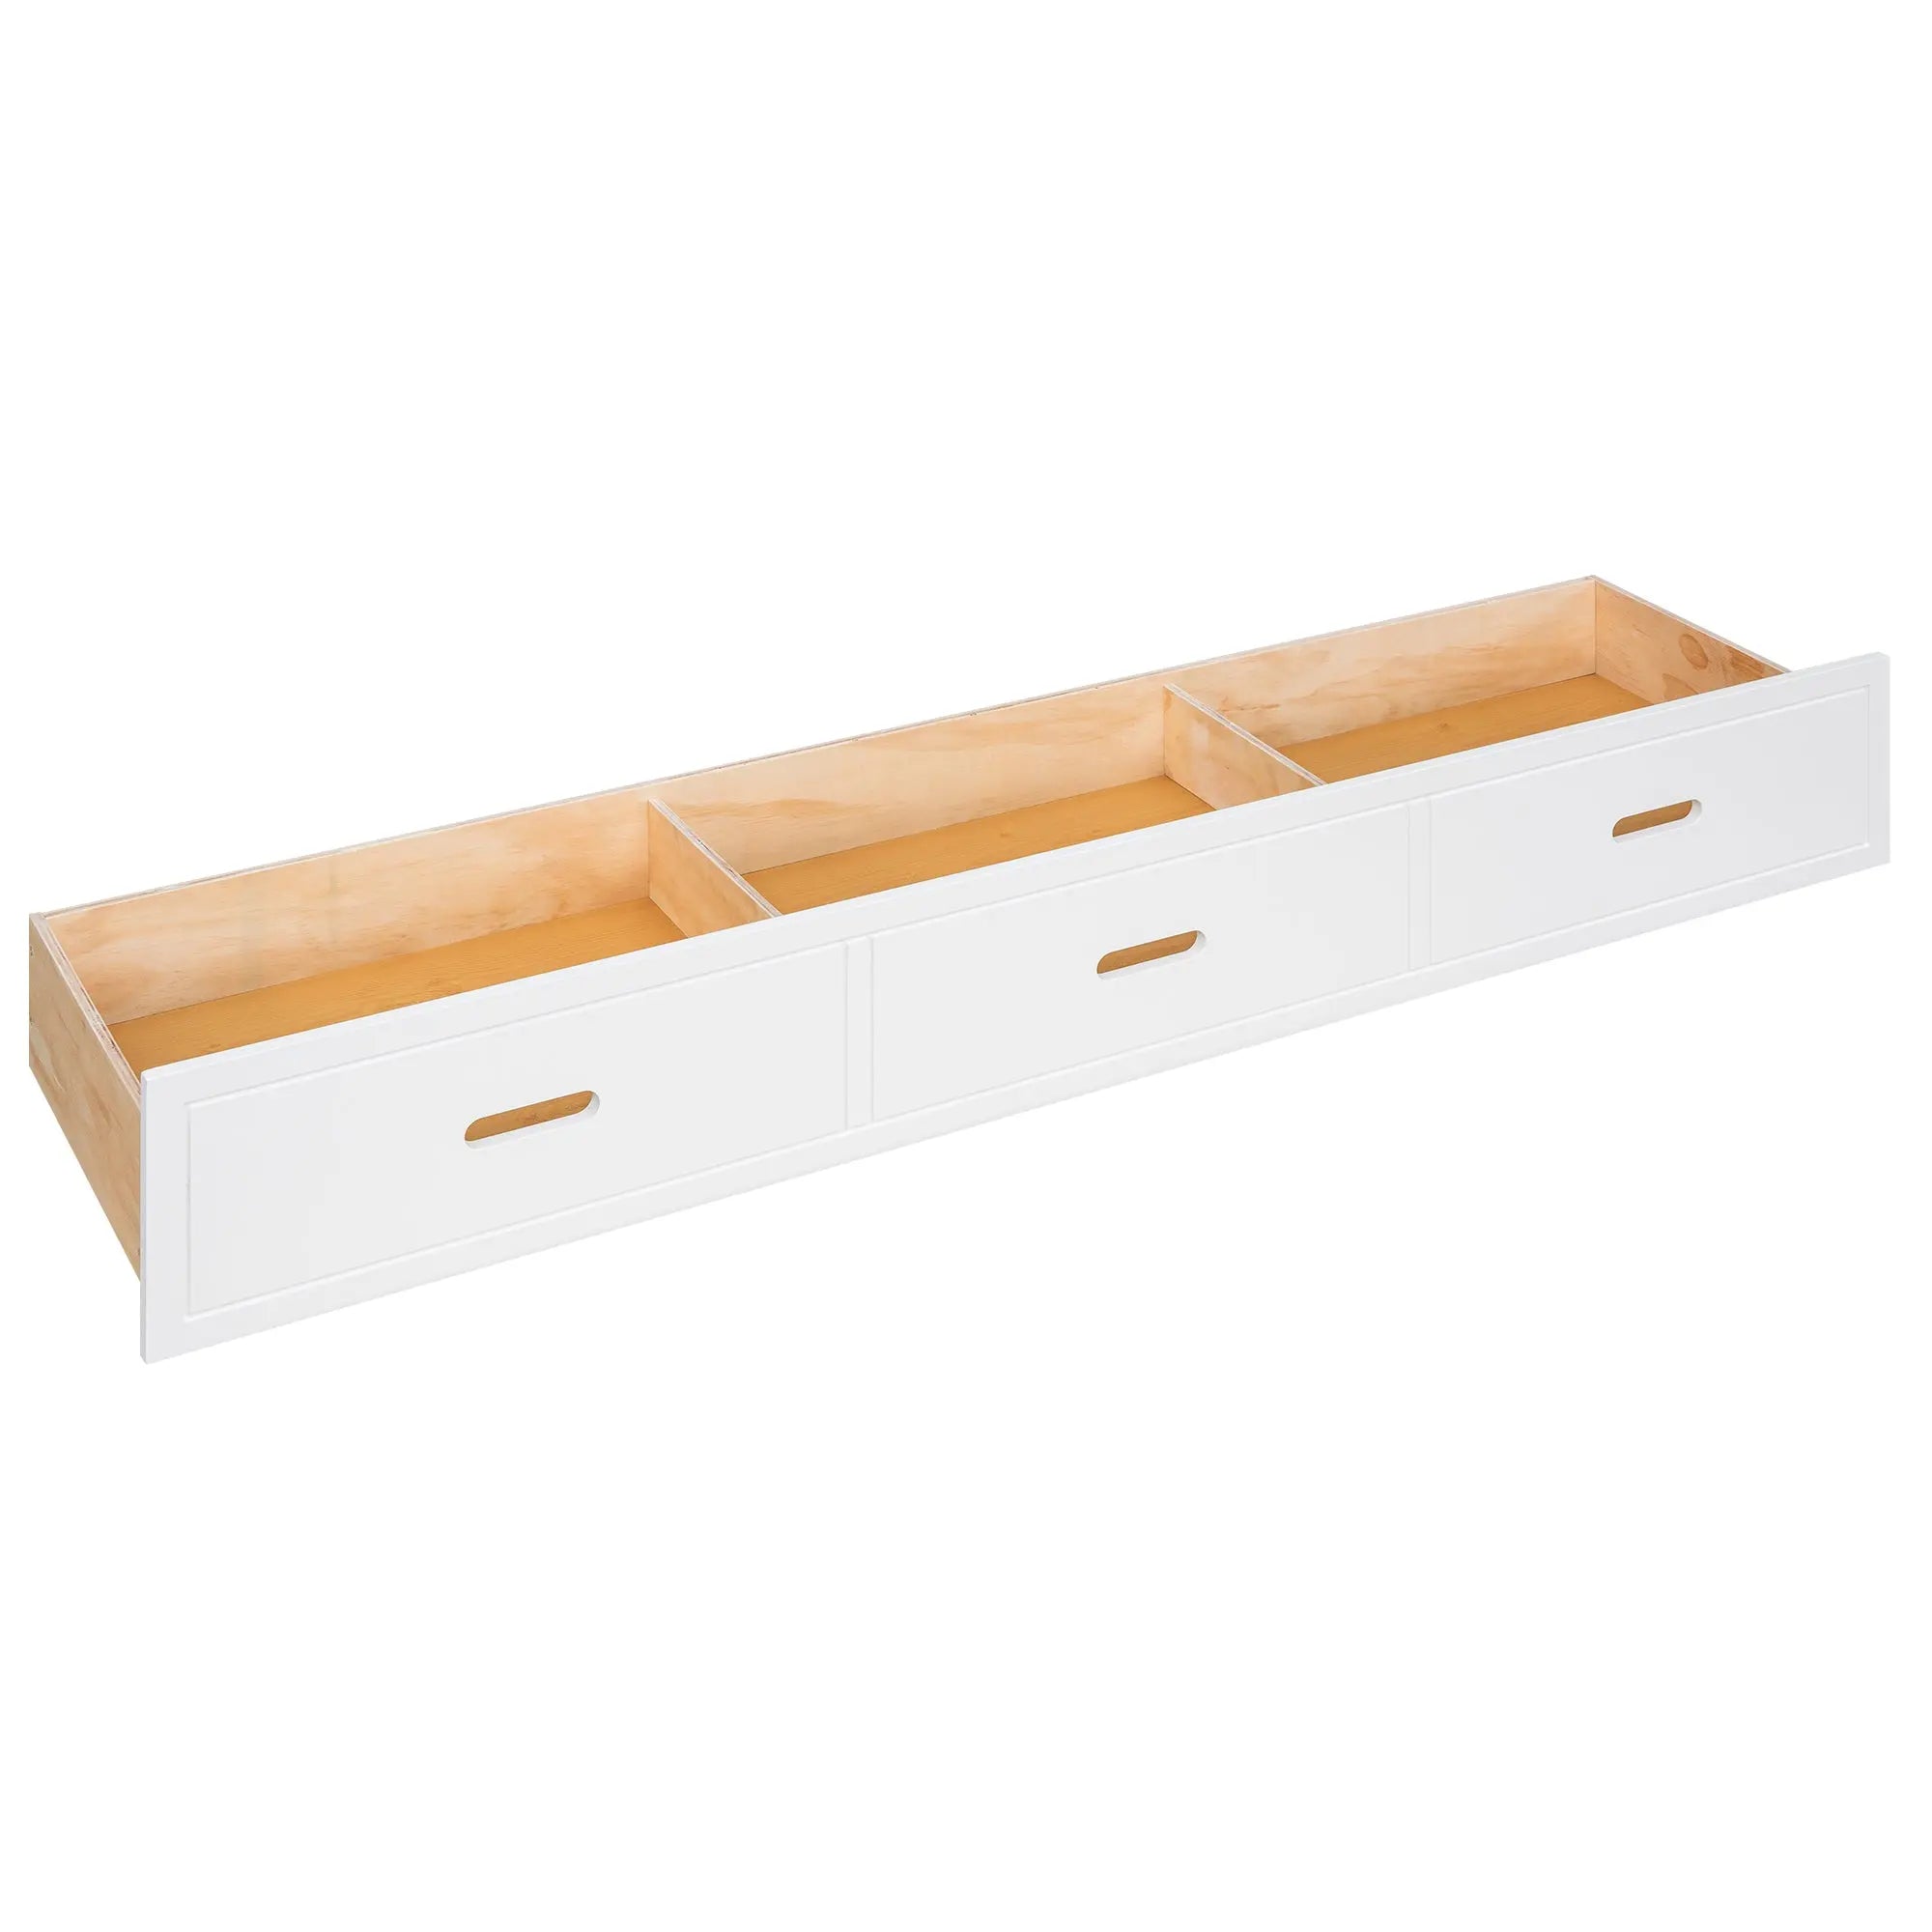 Bellemave® Twin Size Wooden Canopy Daybed with 3 in 1 Storage Drawers